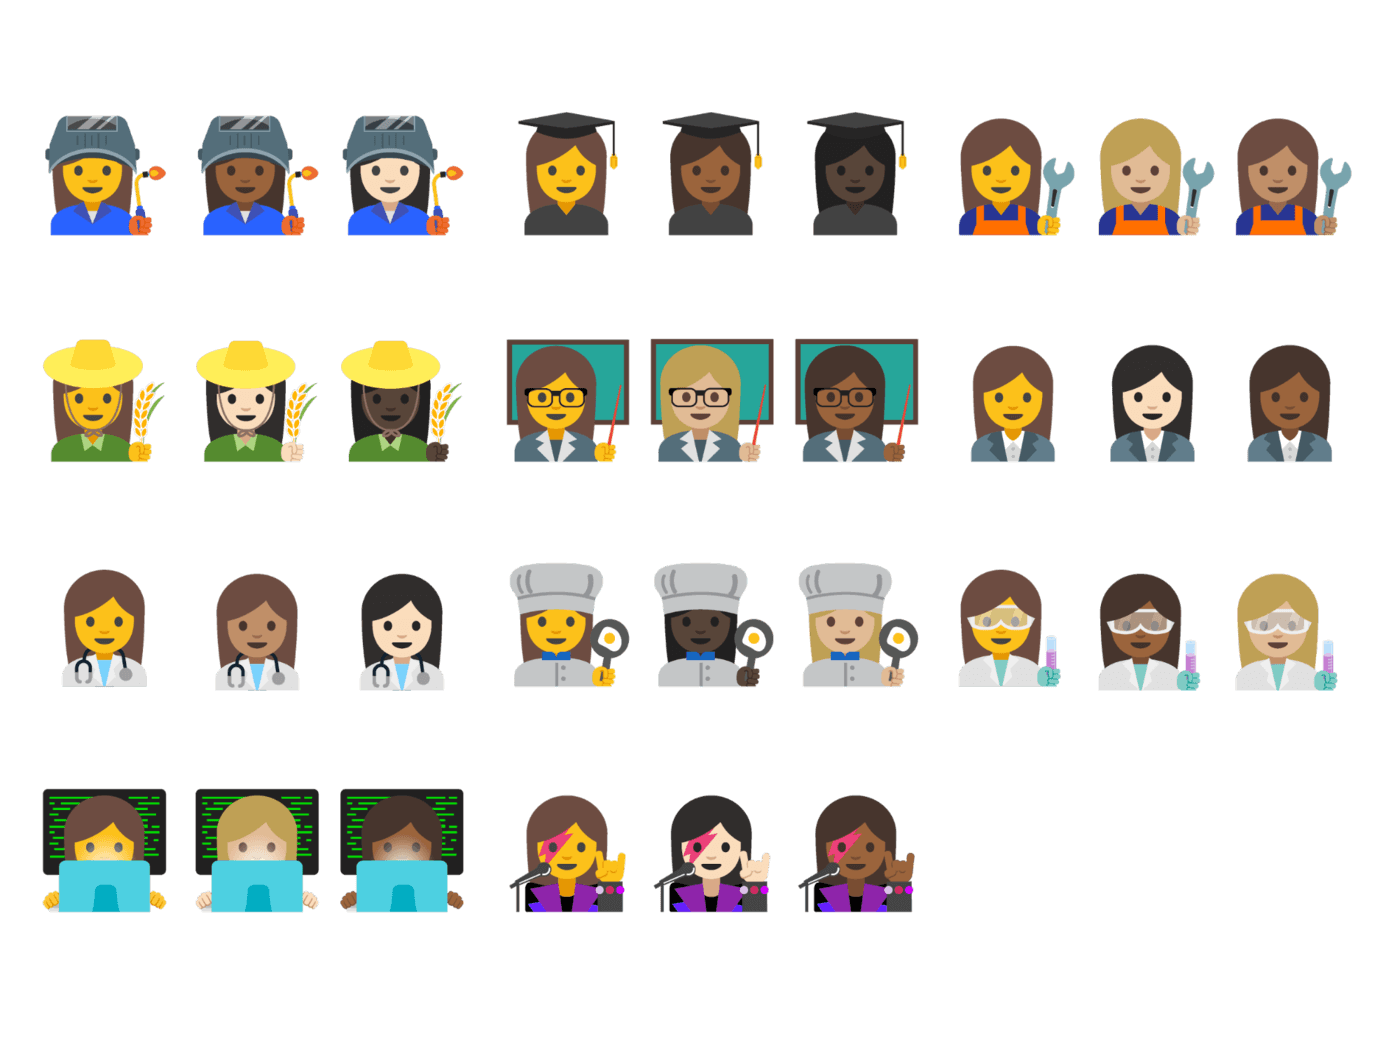 New emojis in Android 7.1.1 Nougat.